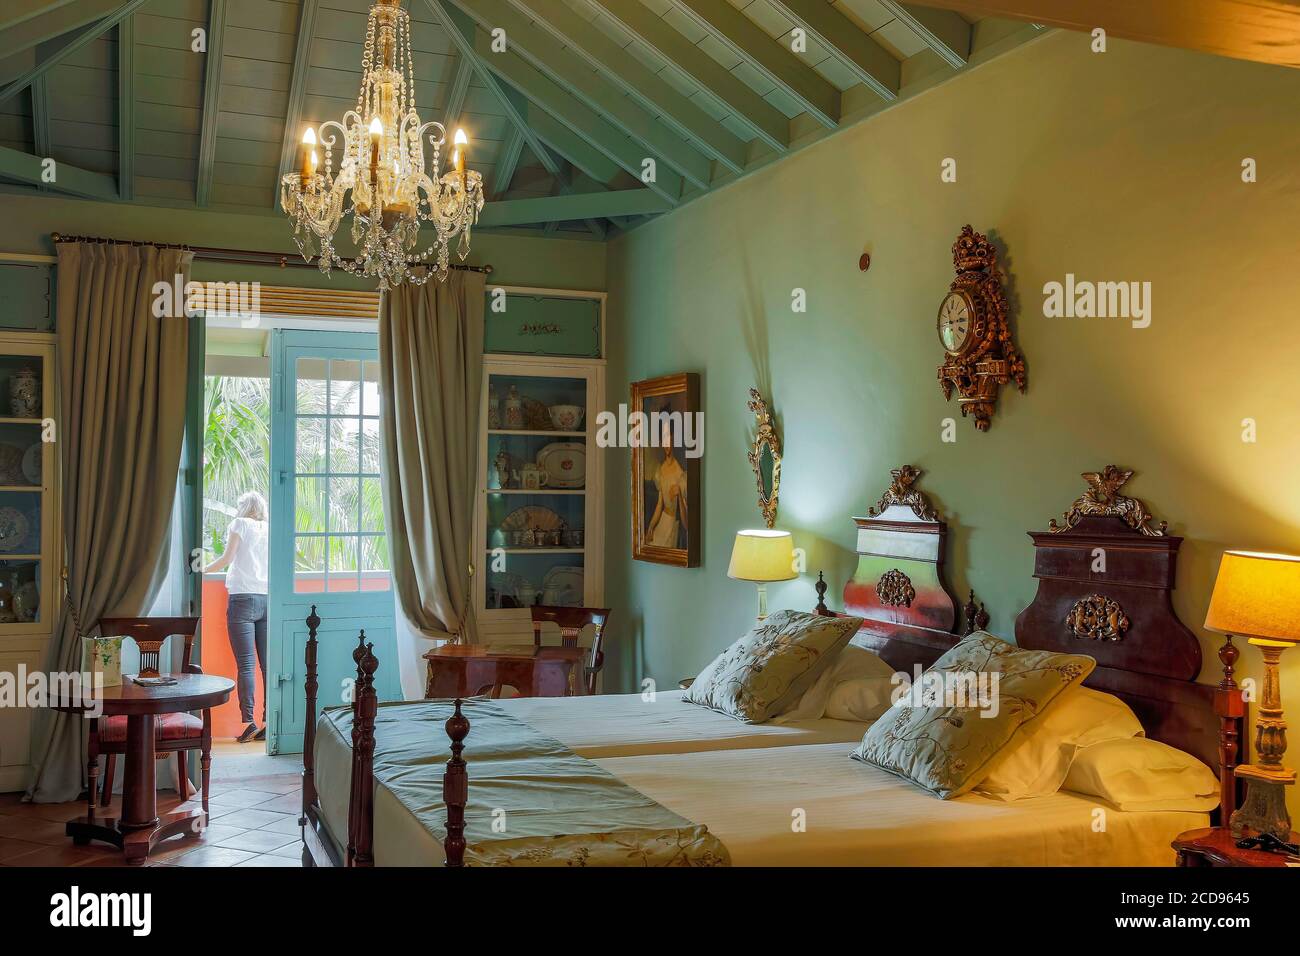 Spain, Canary Islands, La Palma, view of a room of a colonial-style luxury hotel Stock Photo